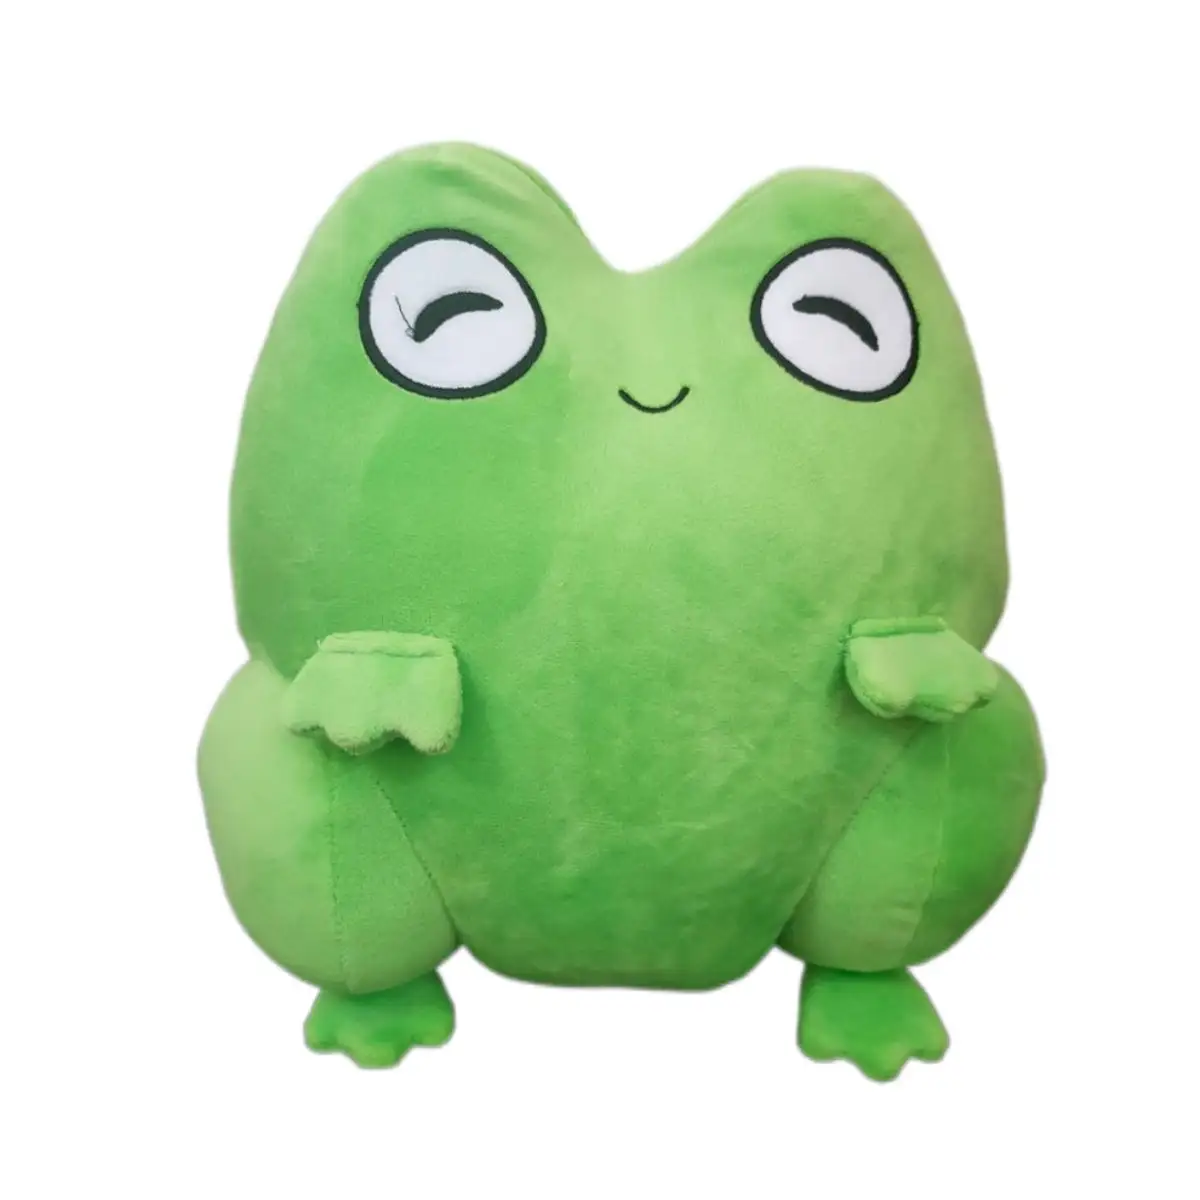 Sofa Cushion Pillow Custom New Plush Toy Soft And Cute Little Frog Doll